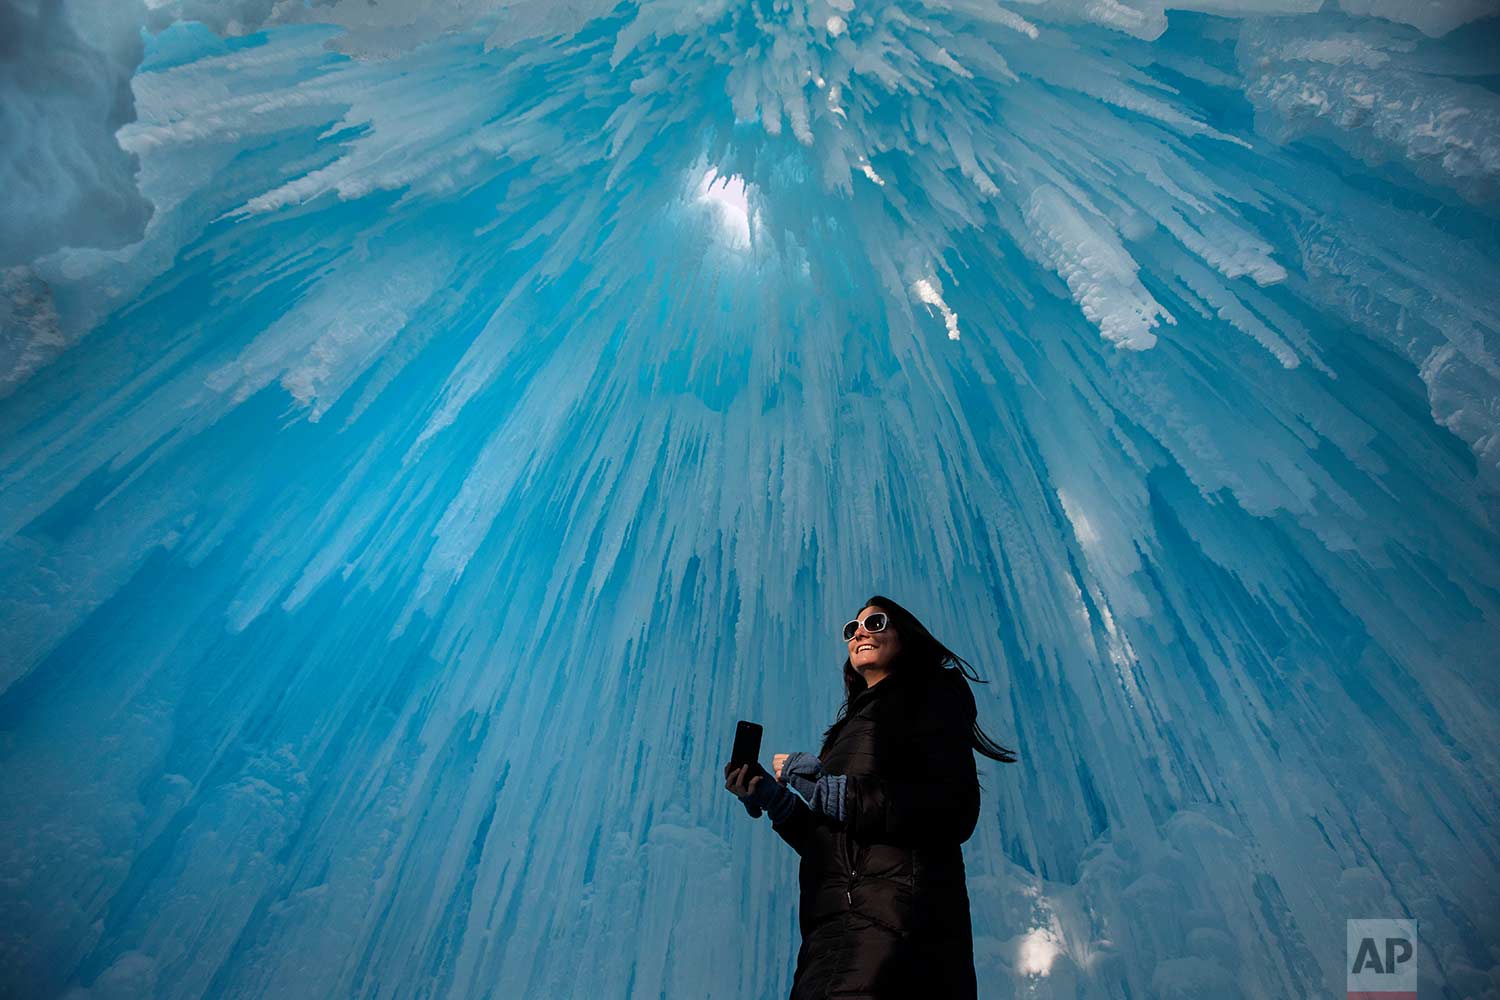  Deanne Ferguson looks at icicles during a tour of the Ice Castles attraction in Edmonton, Alberta, Canada on Thursday, Jan. 4, 2018. (Jason Franson/The Canadian Press via AP) 